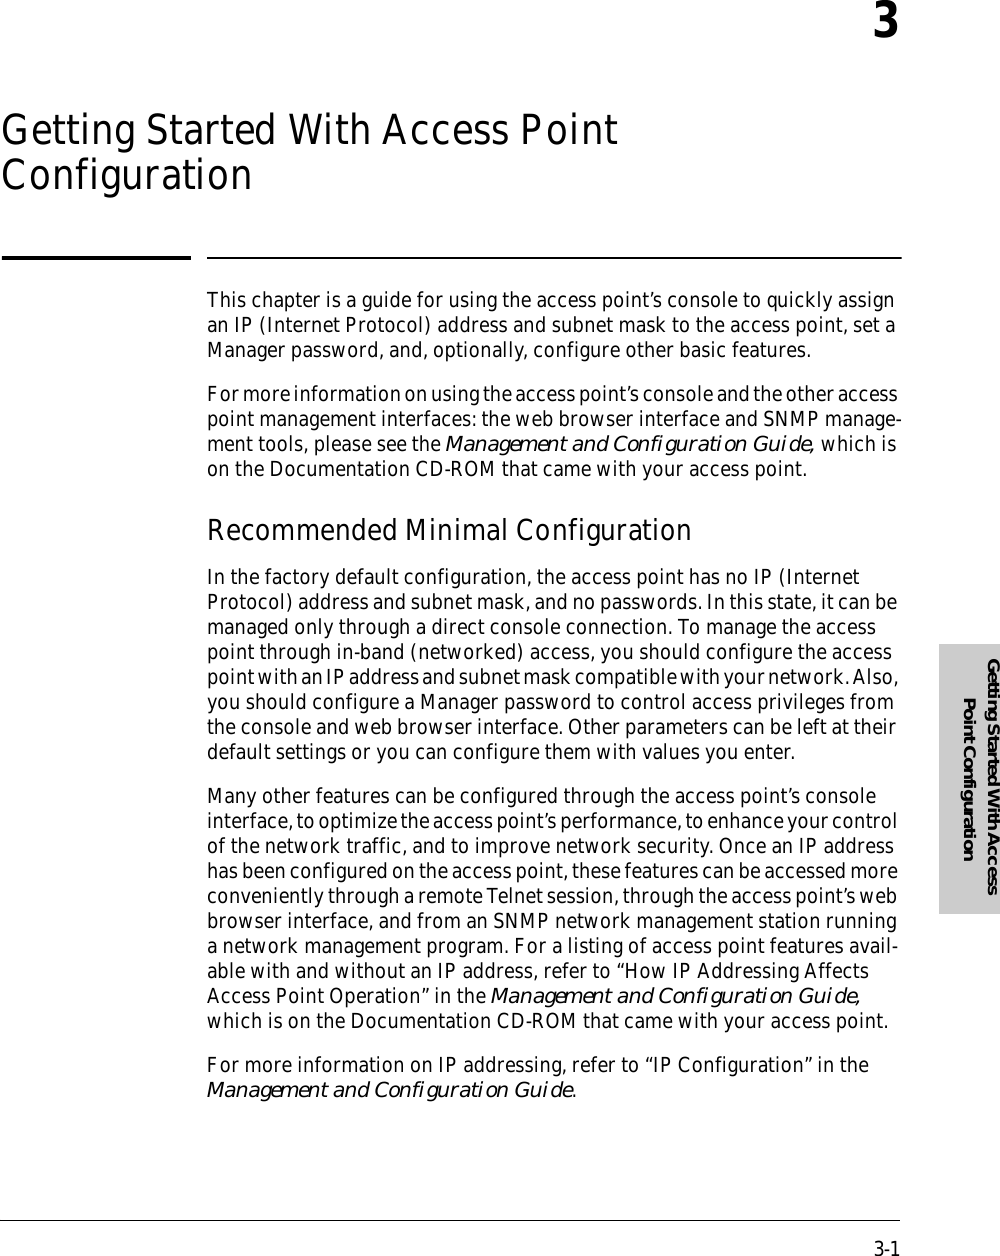 3-1Getting Started With Access Point Configuration3Getting Started With Access Point ConfigurationThis chapter is a guide for using the access point’s console to quickly assign an IP (Internet Protocol) address and subnet mask to the access point, set a Manager password, and, optionally, configure other basic features.For more information on using the access point’s console and the other access point management interfaces: the web browser interface and SNMP manage-ment tools, please see the Management and Configuration Guide, which is on the Documentation CD-ROM that came with your access point.Recommended Minimal ConfigurationIn the factory default configuration, the access point has no IP (Internet Protocol) address and subnet mask, and no passwords. In this state, it can be managed only through a direct console connection. To manage the access point through in-band (networked) access, you should configure the access point with an IP address and subnet mask compatible with your network. Also, you should configure a Manager password to control access privileges from the console and web browser interface. Other parameters can be left at their default settings or you can configure them with values you enter.Many other features can be configured through the access point’s console interface, to optimize the access point’s performance, to enhance your control of the network traffic, and to improve network security. Once an IP address has been configured on the access point, these features can be accessed more conveniently through a remote Telnet session, through the access point’s web browser interface, and from an SNMP network management station running a network management program. For a listing of access point features avail-able with and without an IP address, refer to “How IP Addressing Affects Access Point Operation” in the Management and Configuration Guide, which is on the Documentation CD-ROM that came with your access point.For more information on IP addressing, refer to “IP Configuration” in the Management and Configuration Guide.